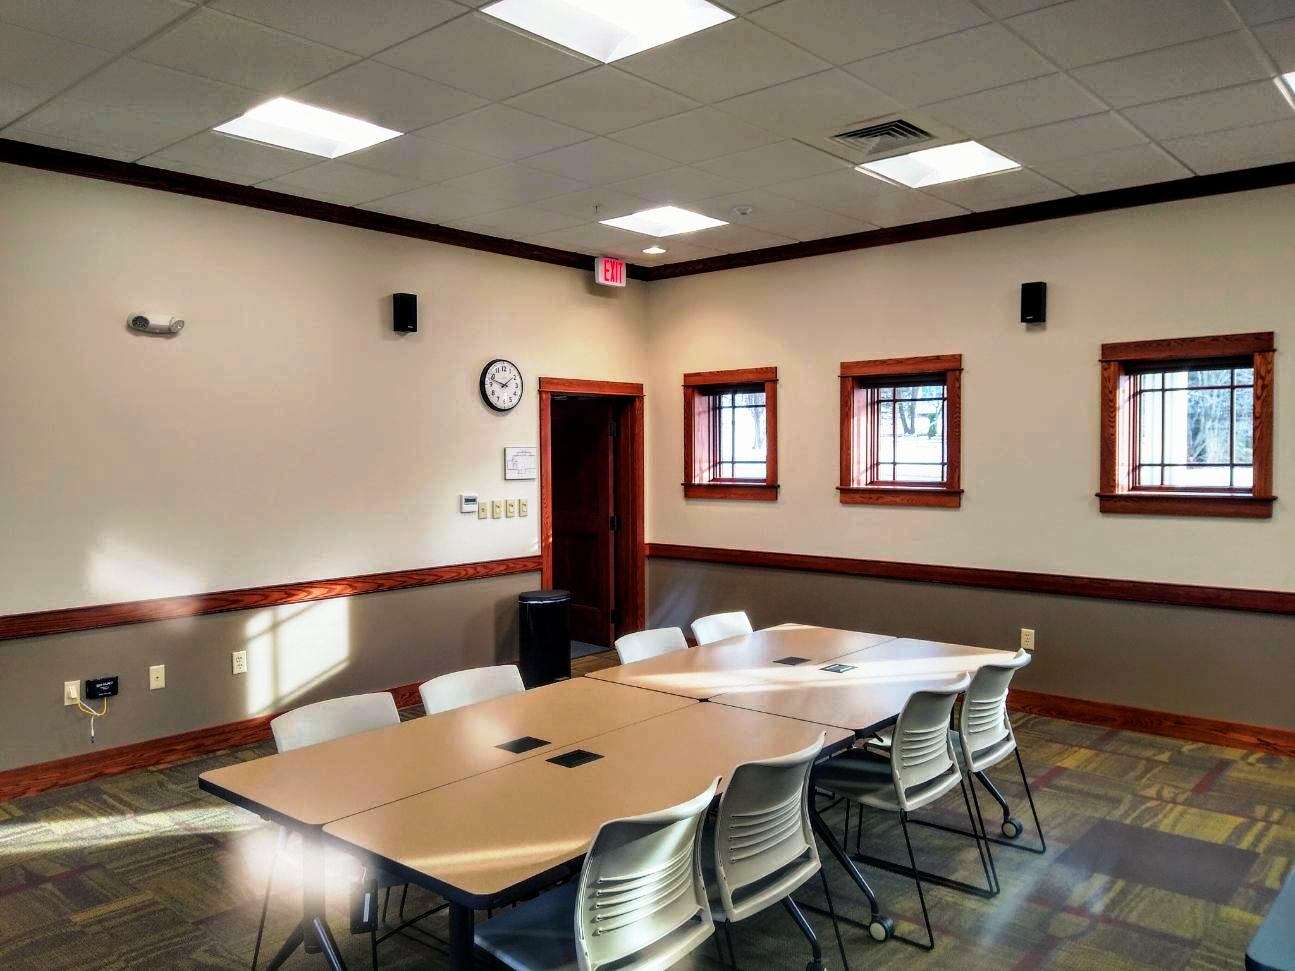 Community Room with tables